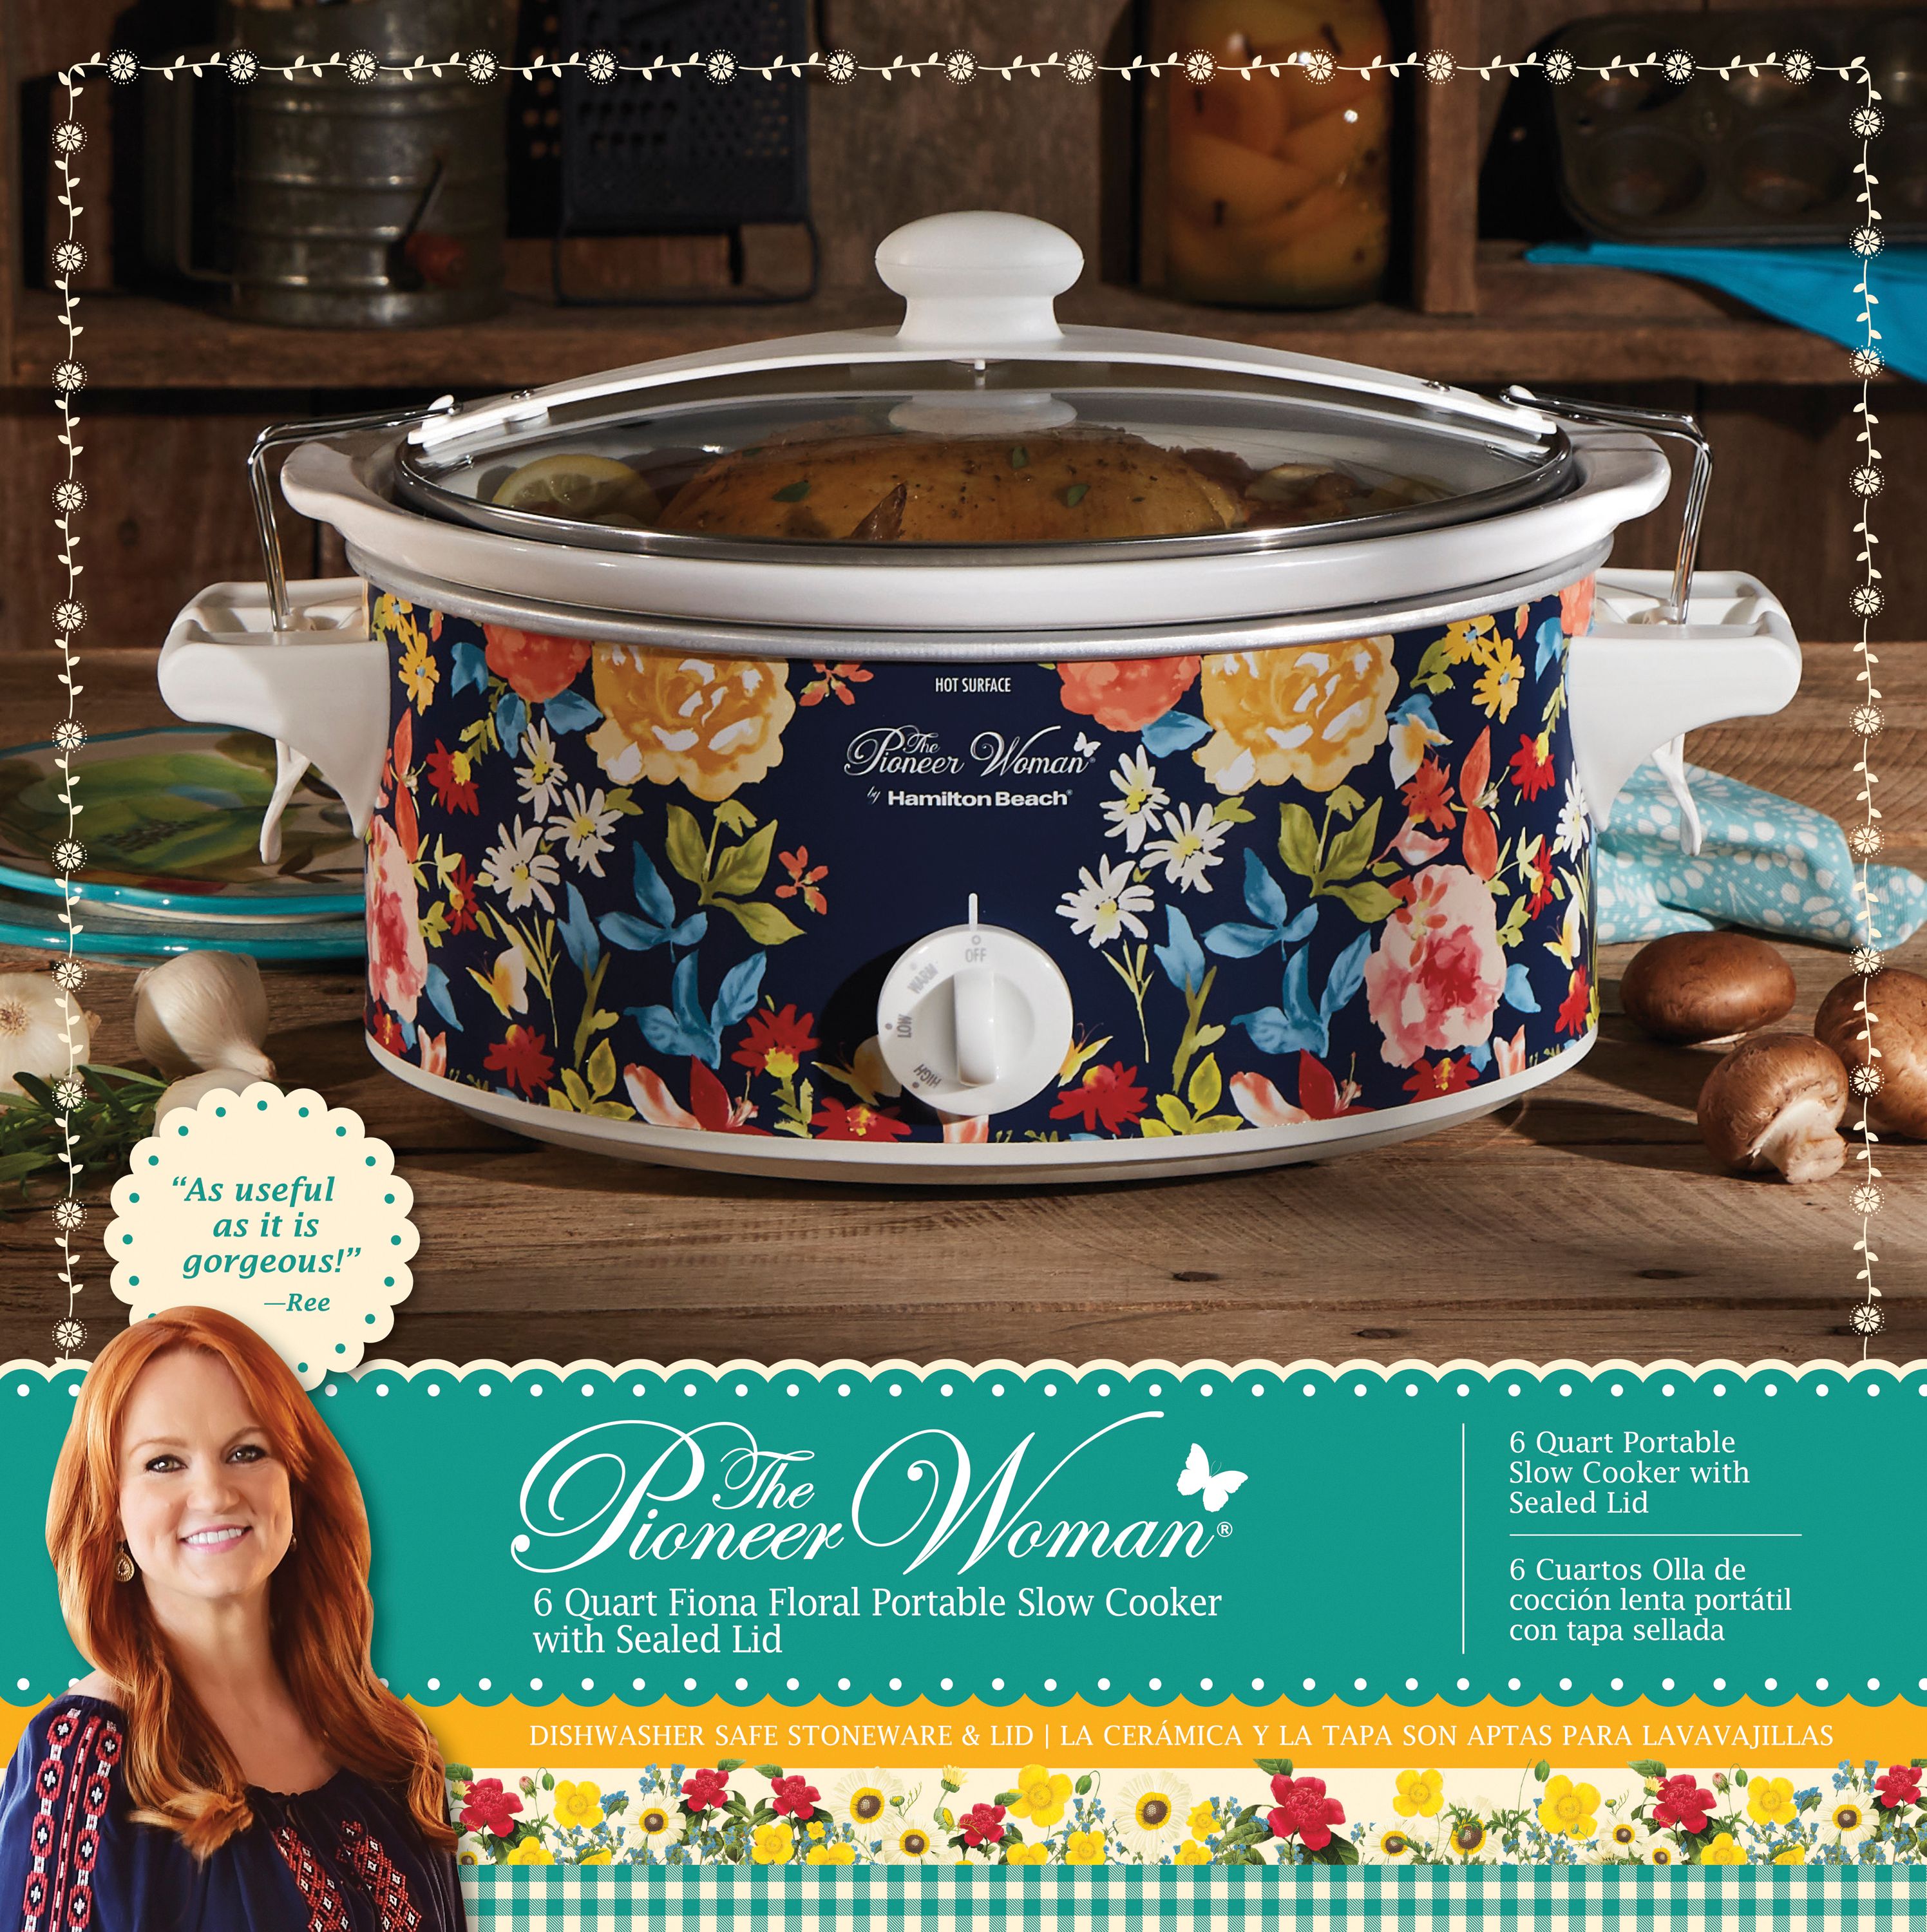 Pioneer Woman 6 Quart Portable Slow Cooker Fiona Floral | Model# 33066 By Hamilton Beach - image 4 of 12